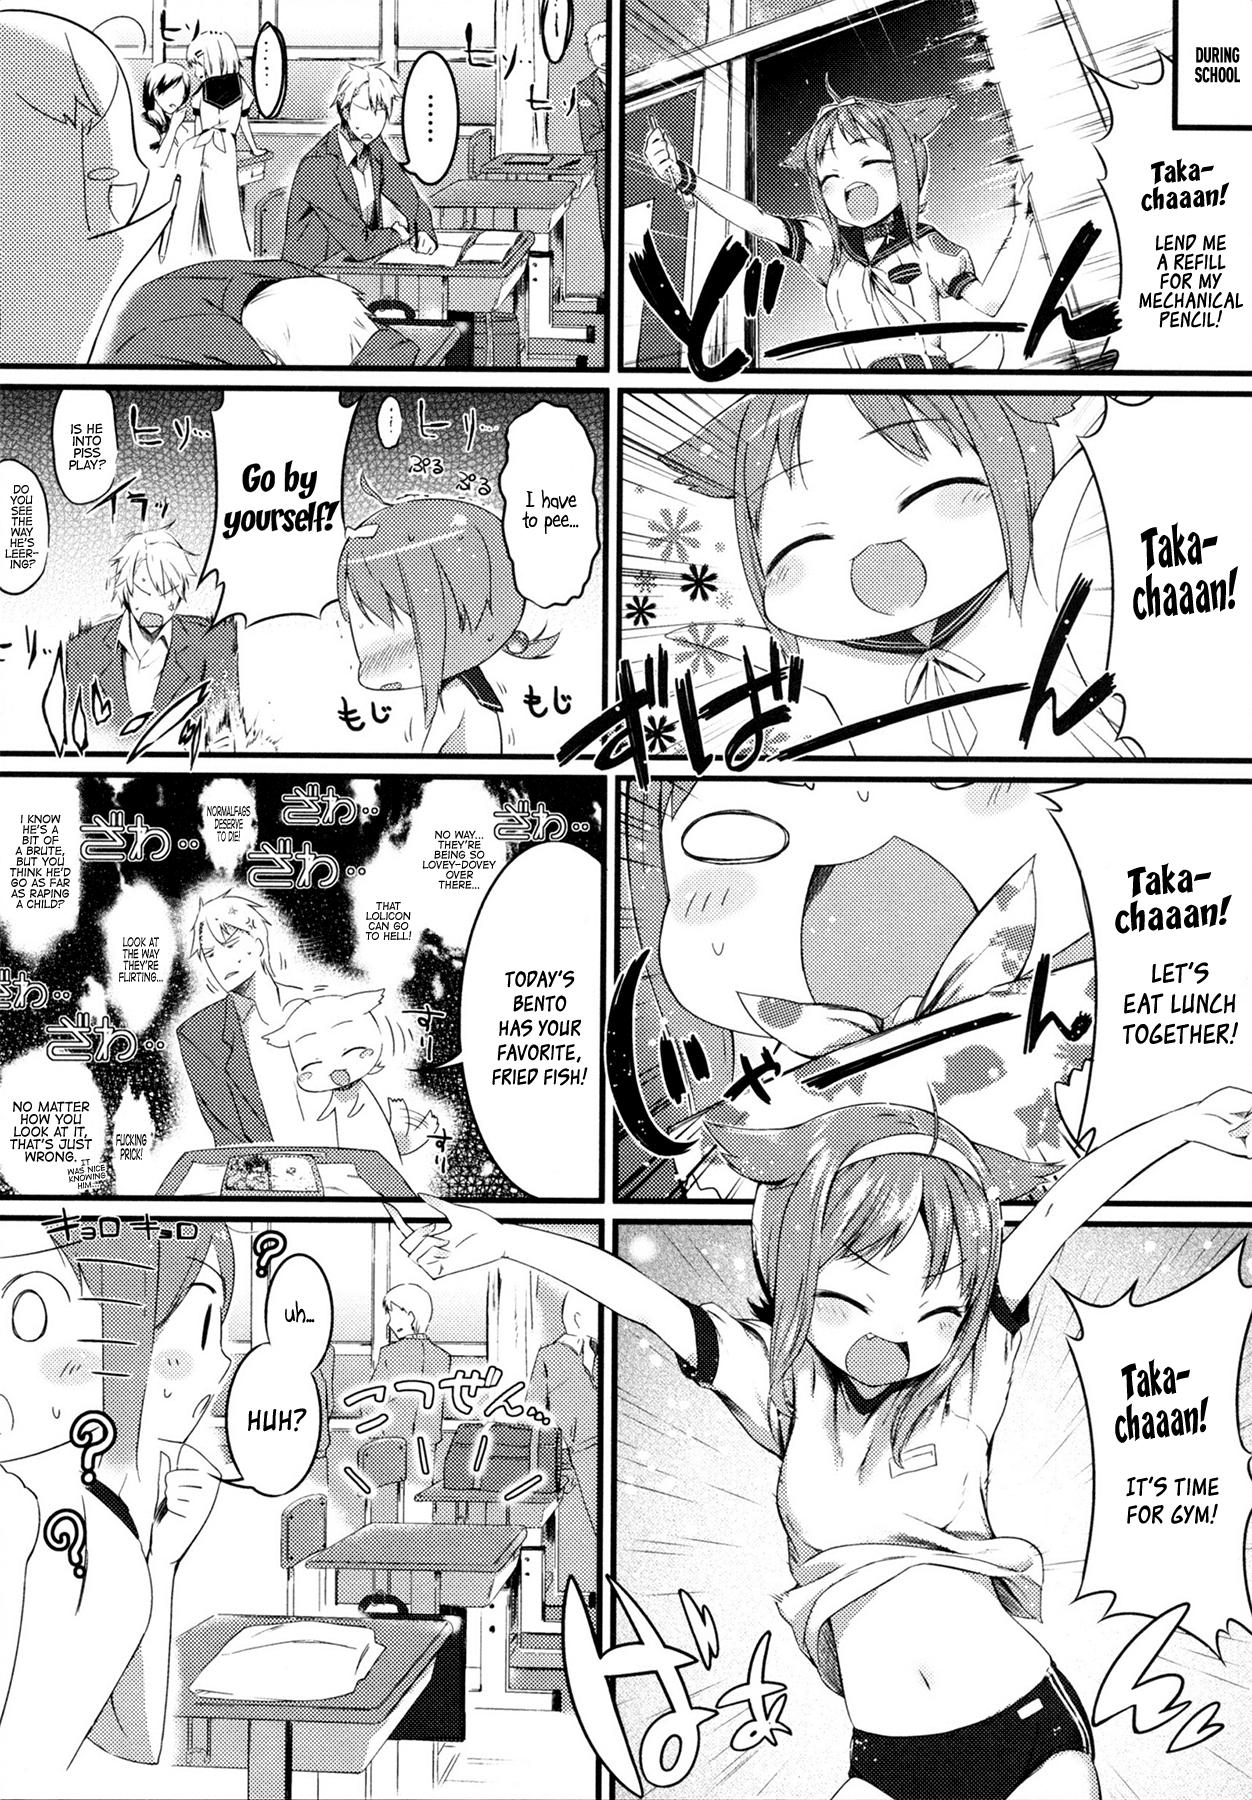 Home Kyou no Wanko | Today's Doggy Yanks Featured - Page 4